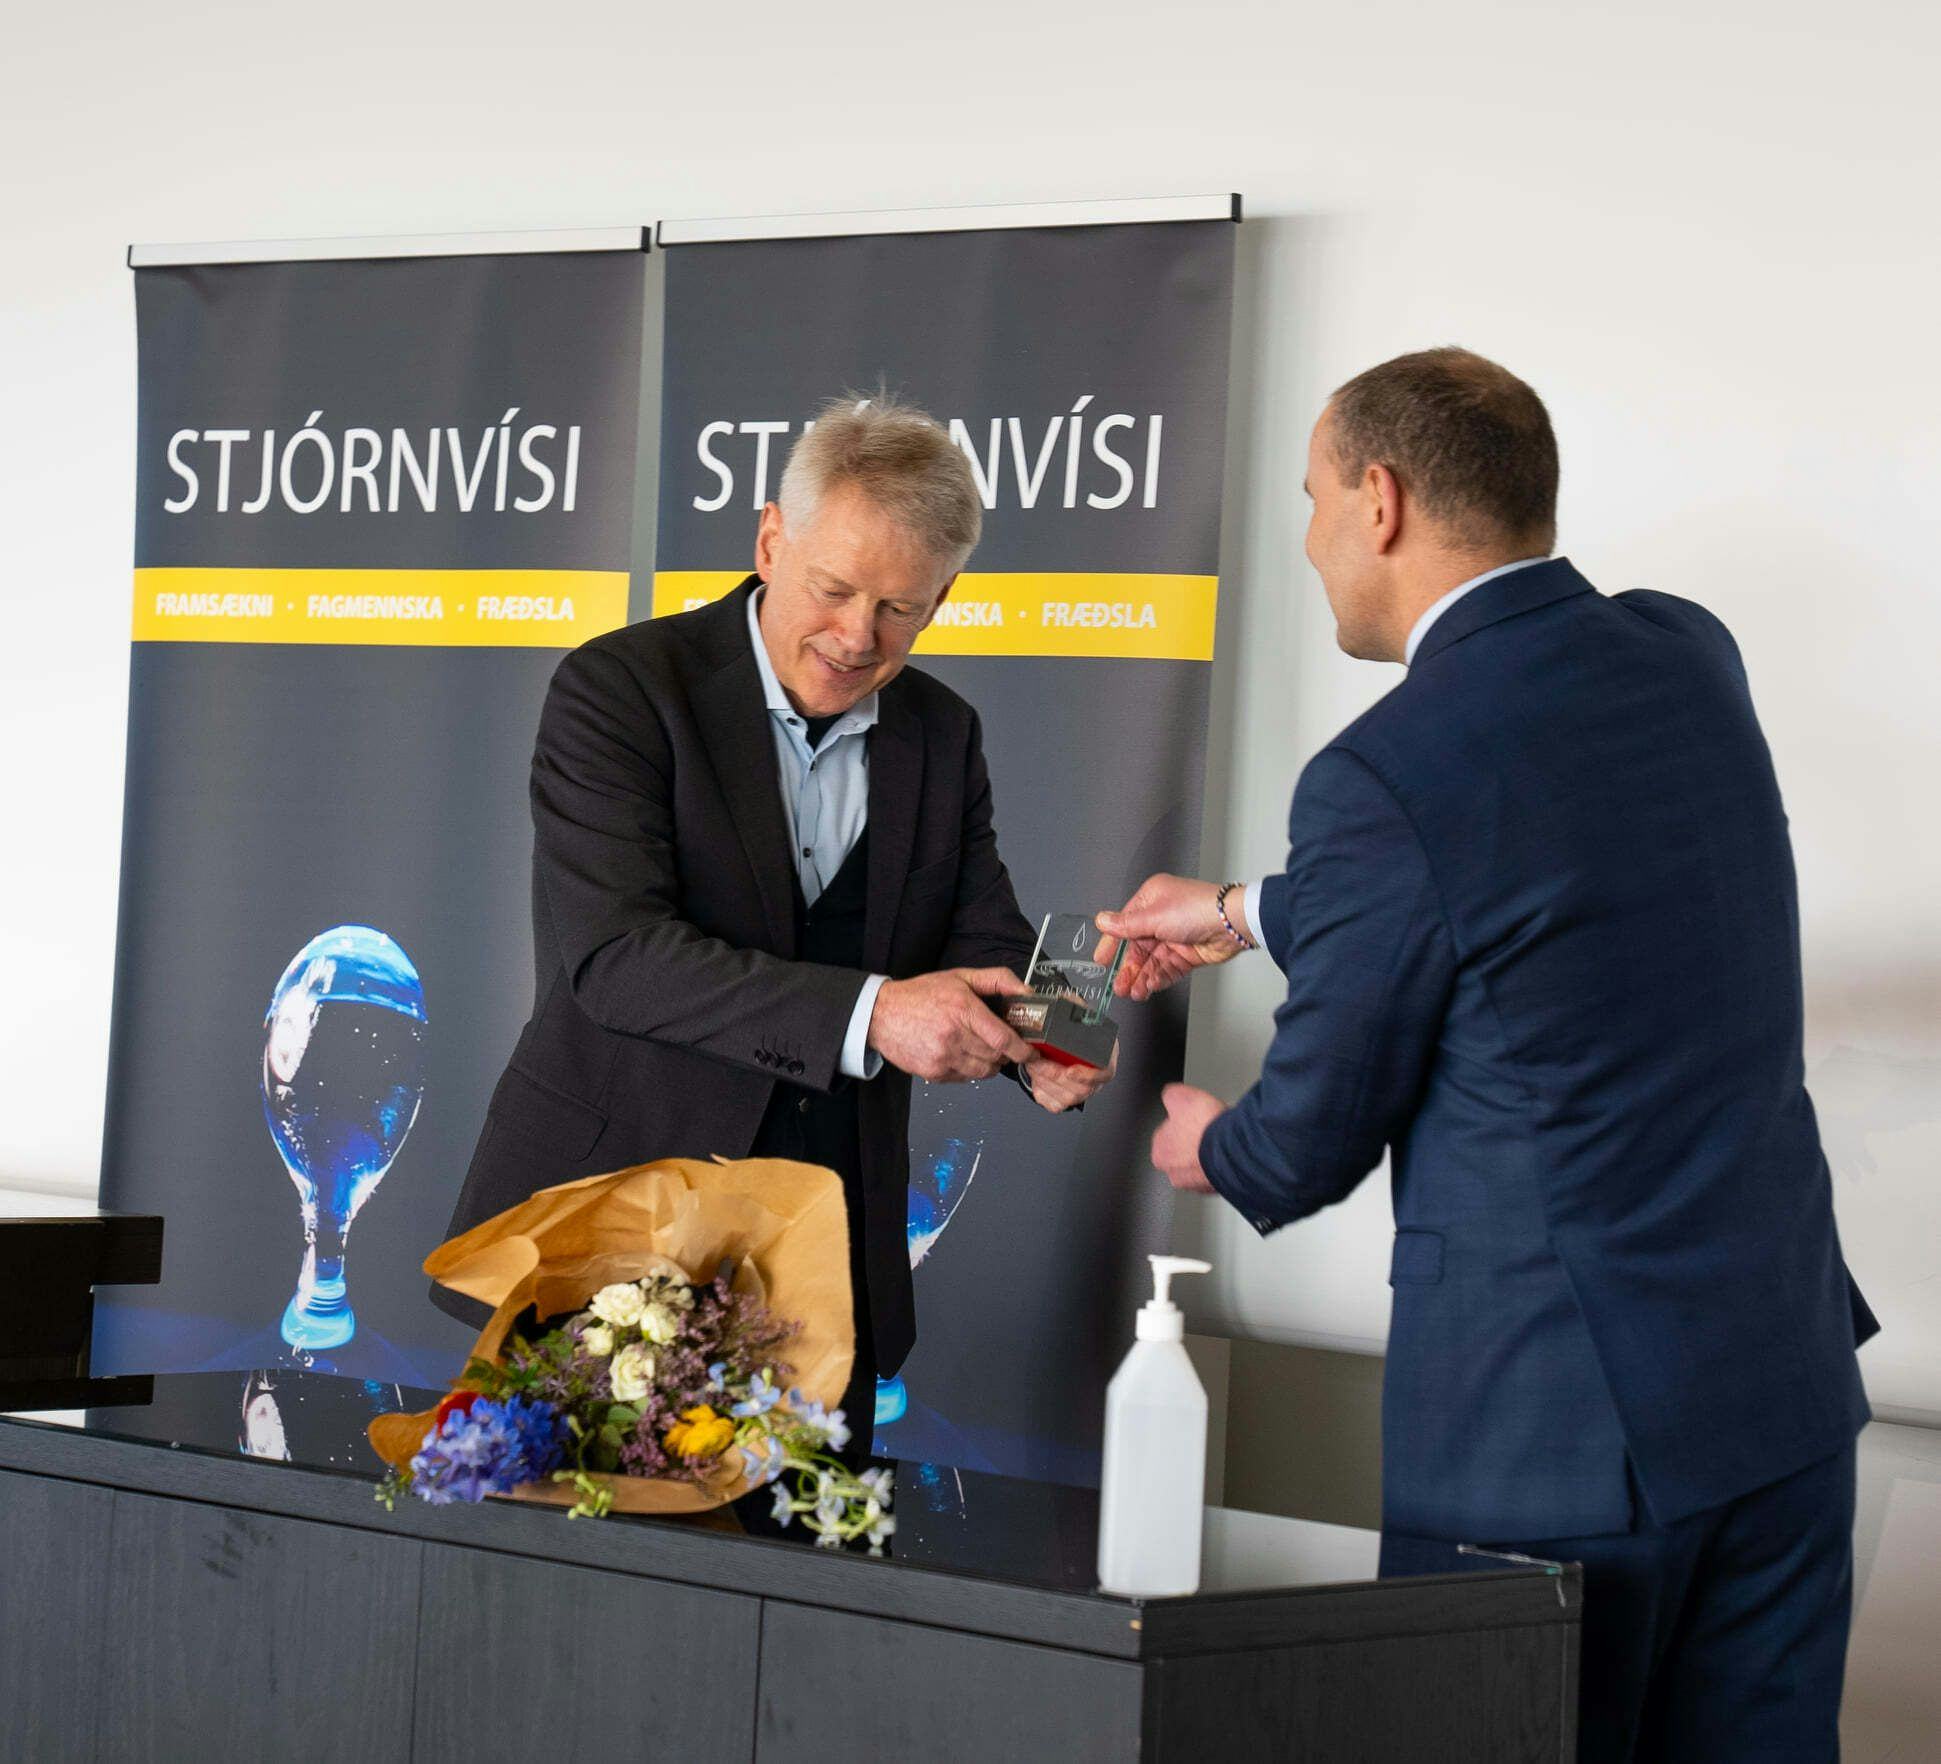 The photo captures an event where one man is handing a small trophy to another